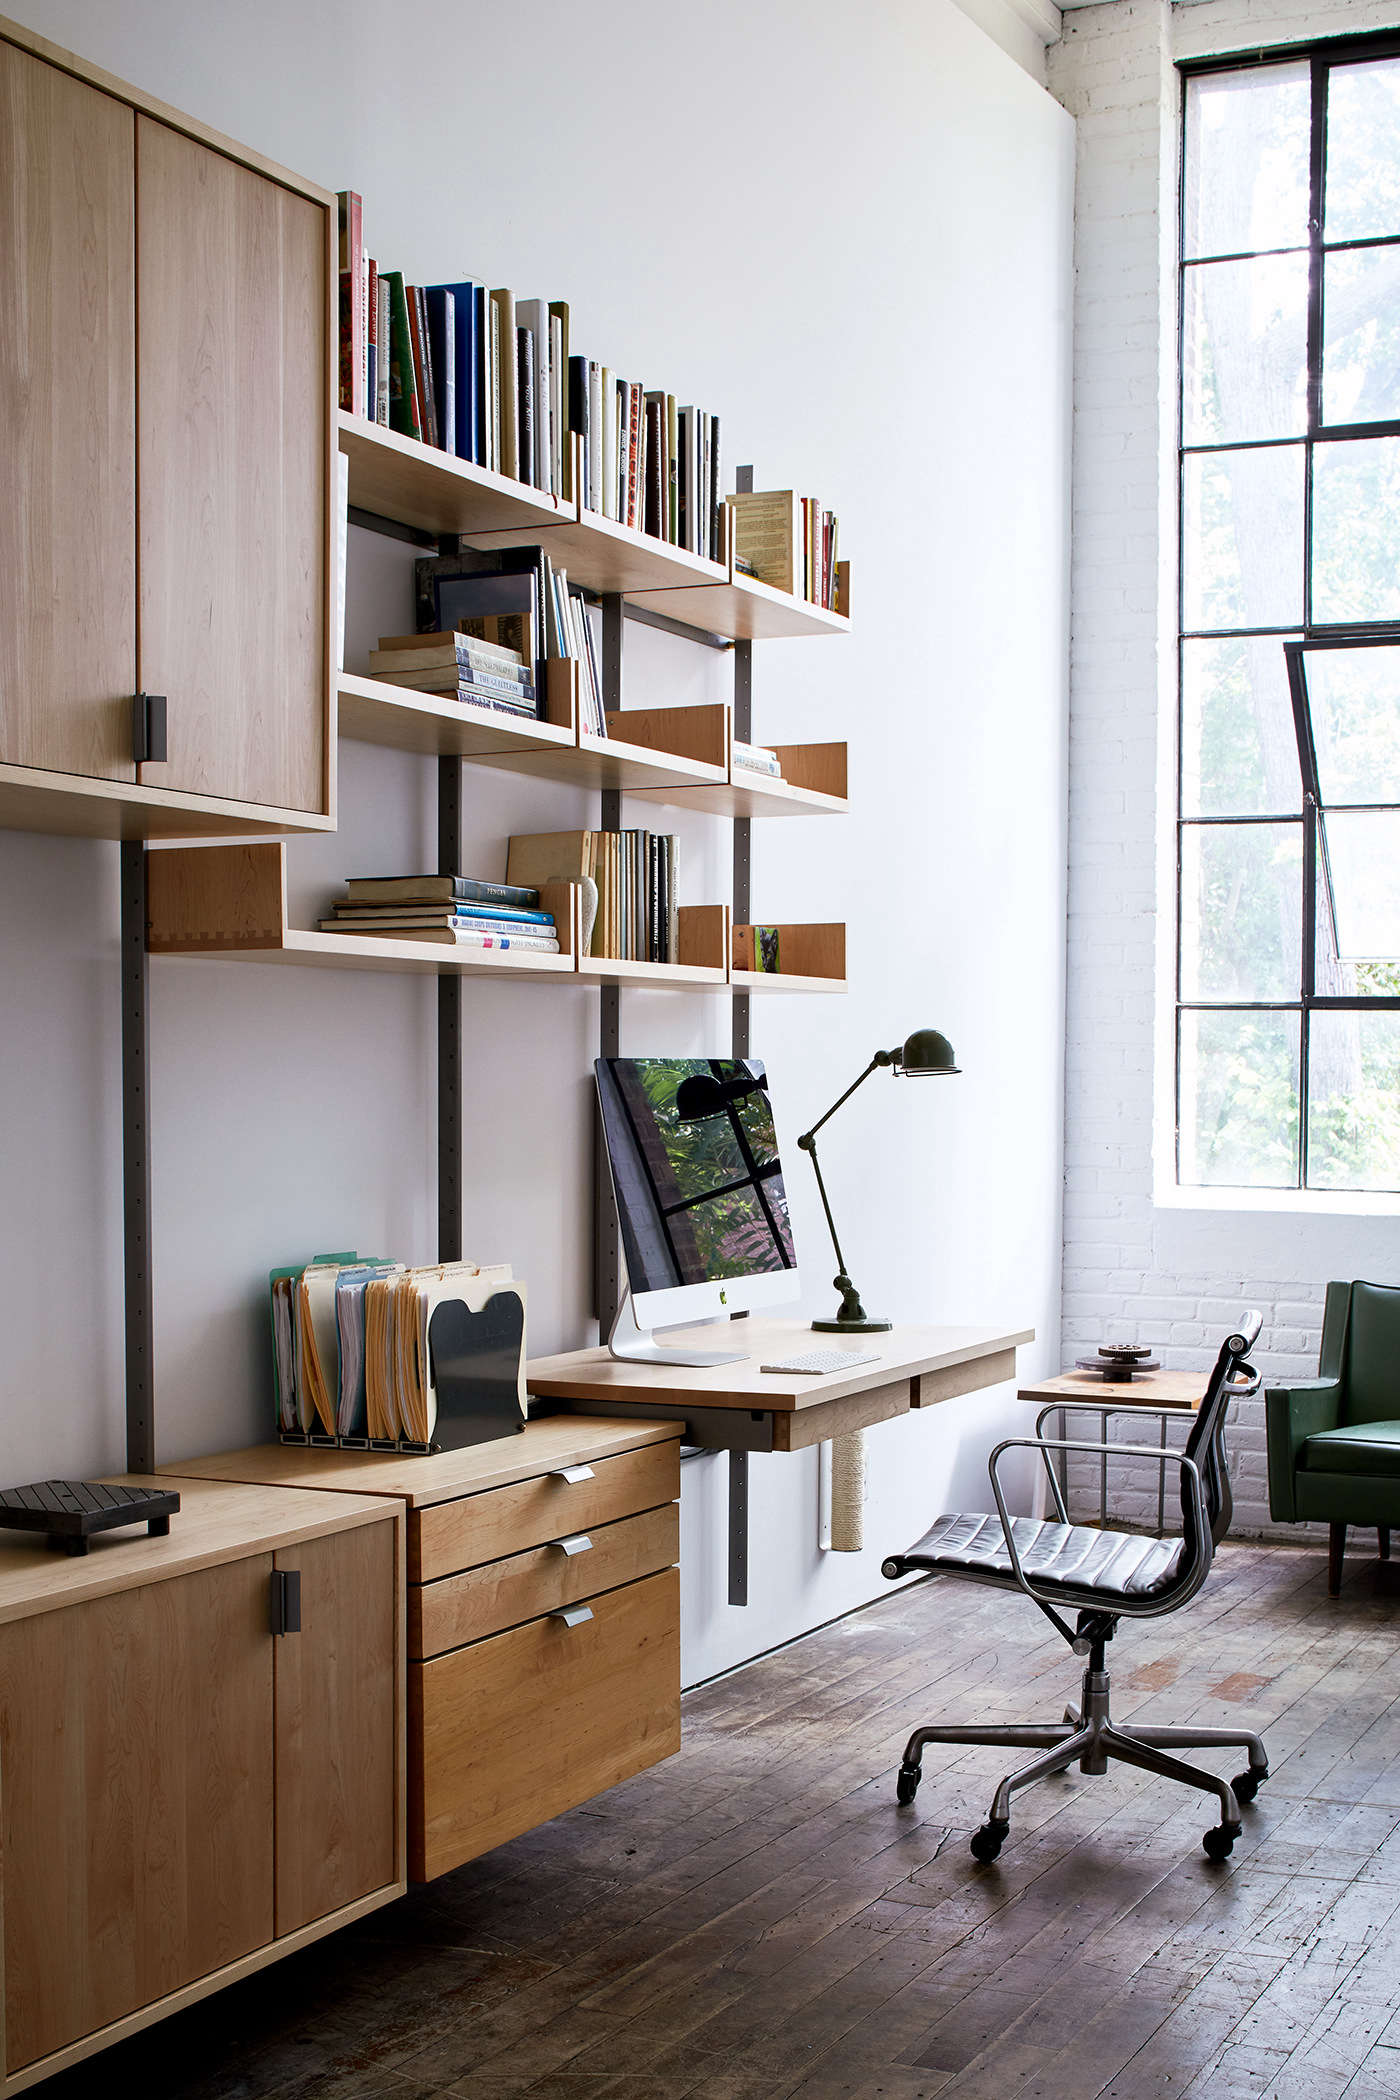 this is a modular system for a home office